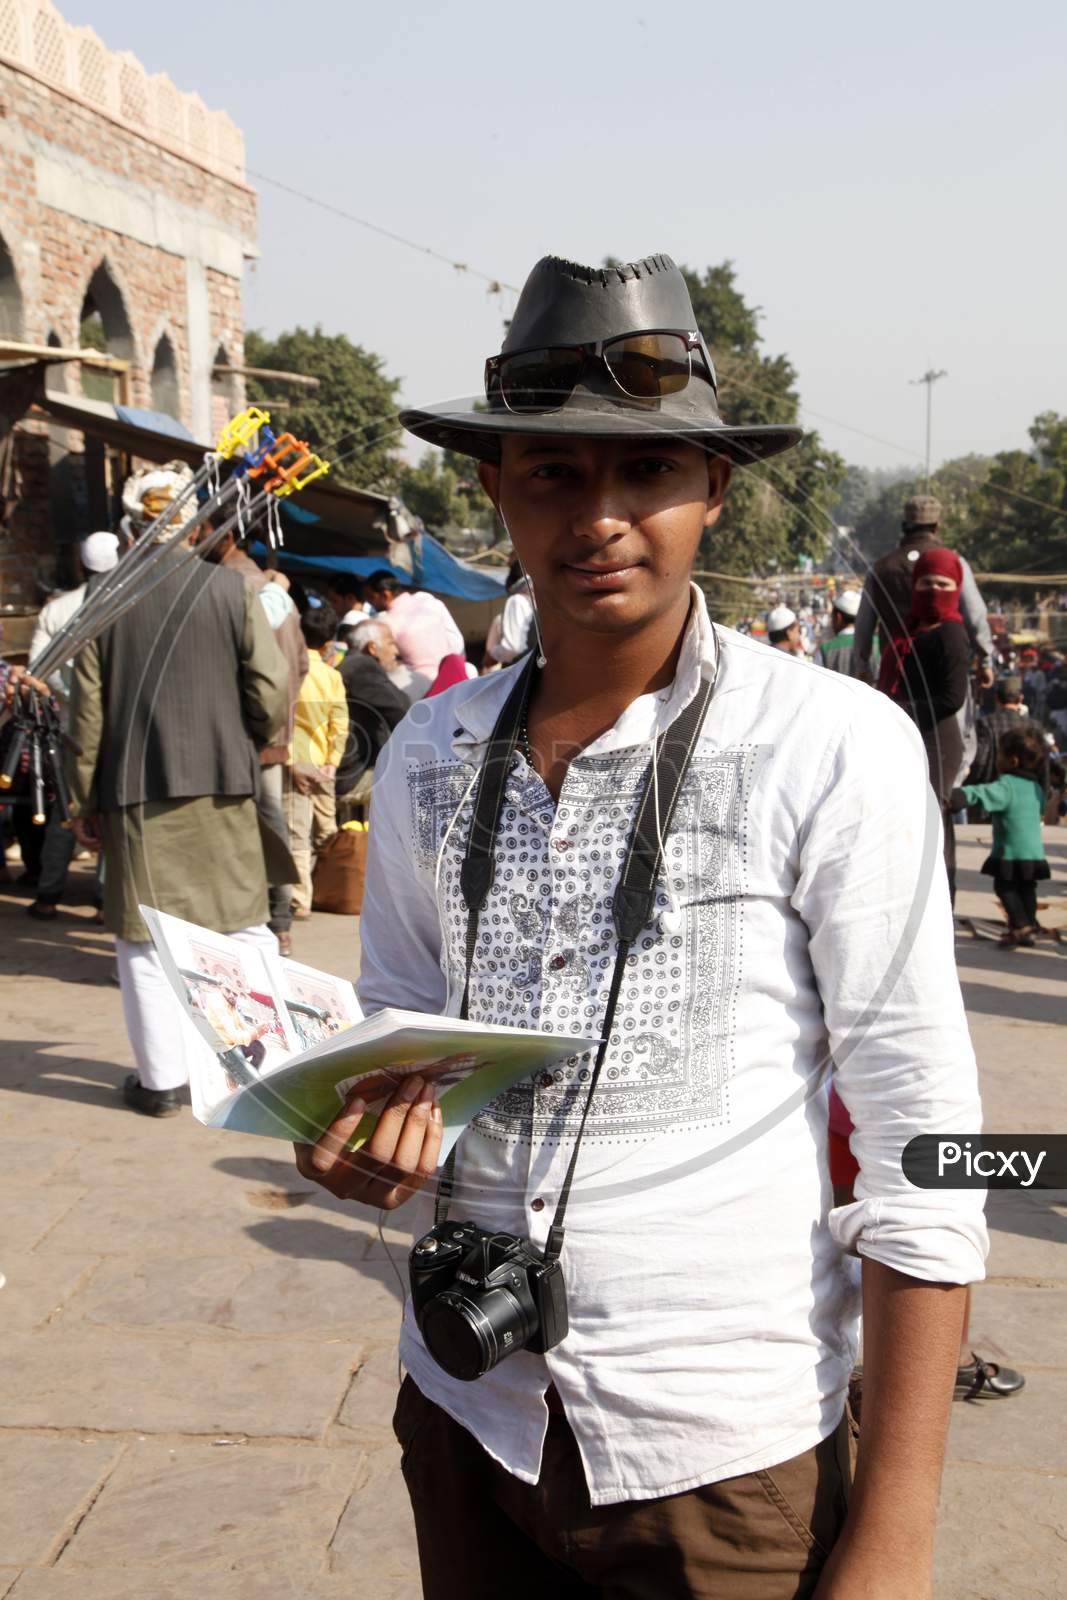 A Young Indian Boy with Camera